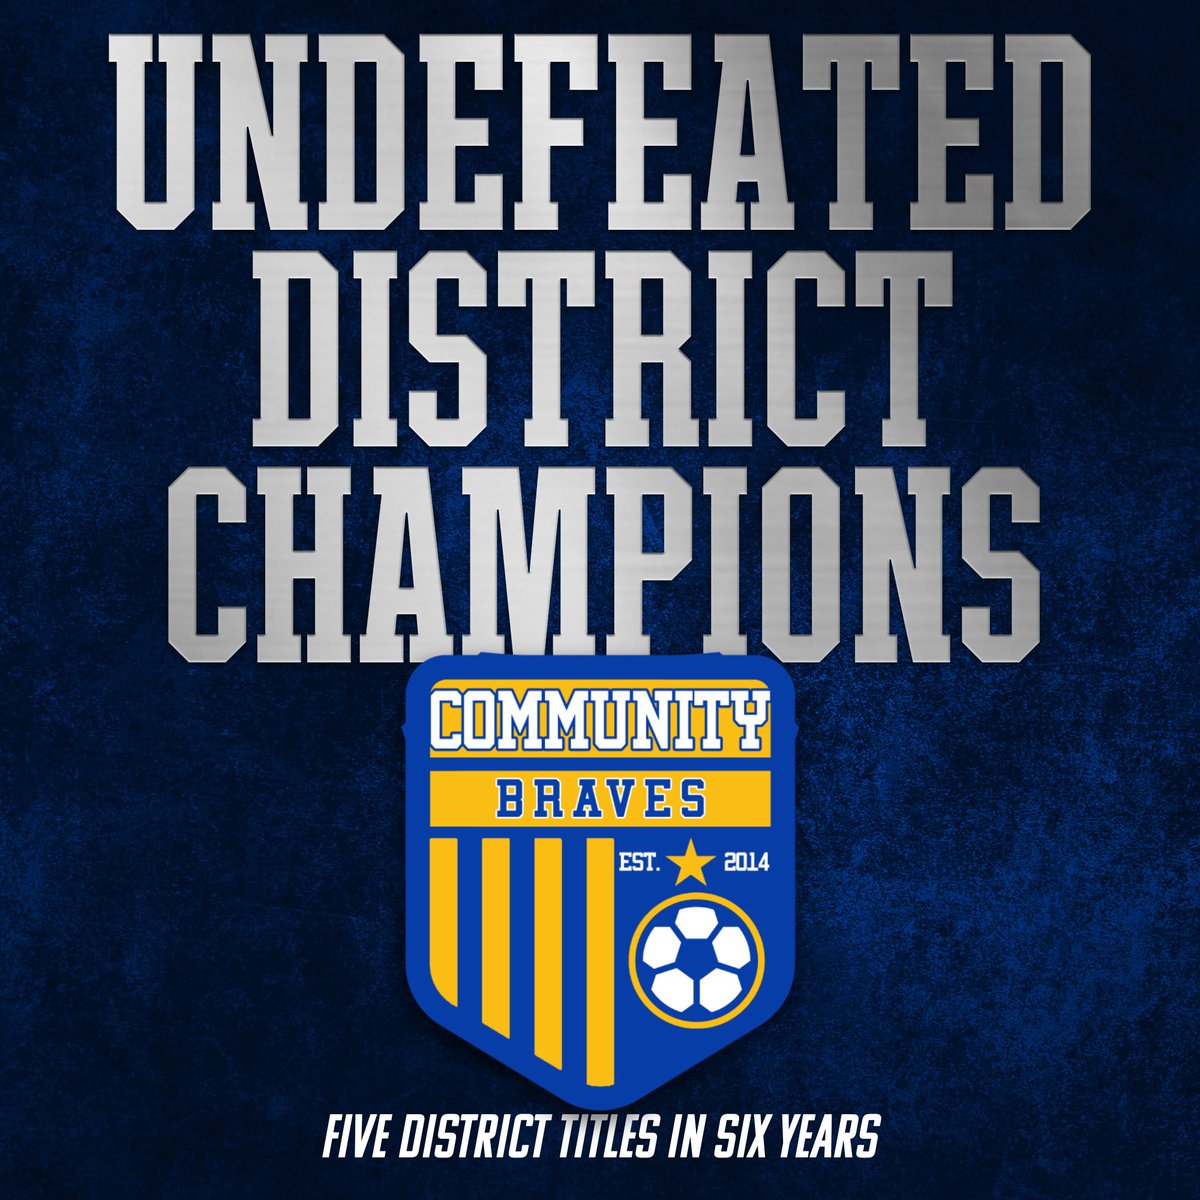 Congrats Community Boys Soccer on another district championship!